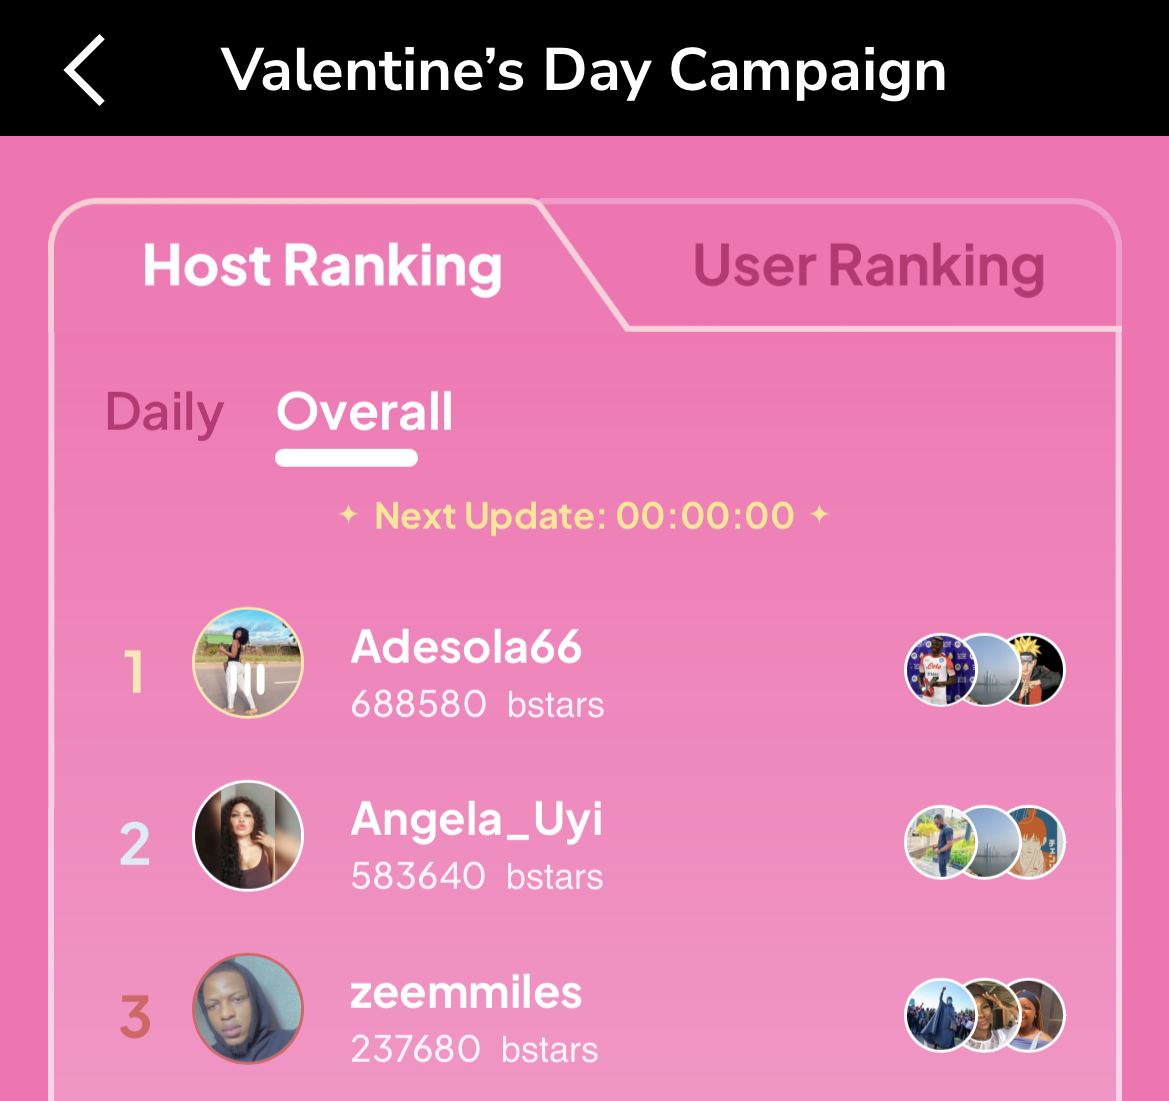  Congratulations to the winners of the Valentine's Day Campaign (02 .03-02.14).